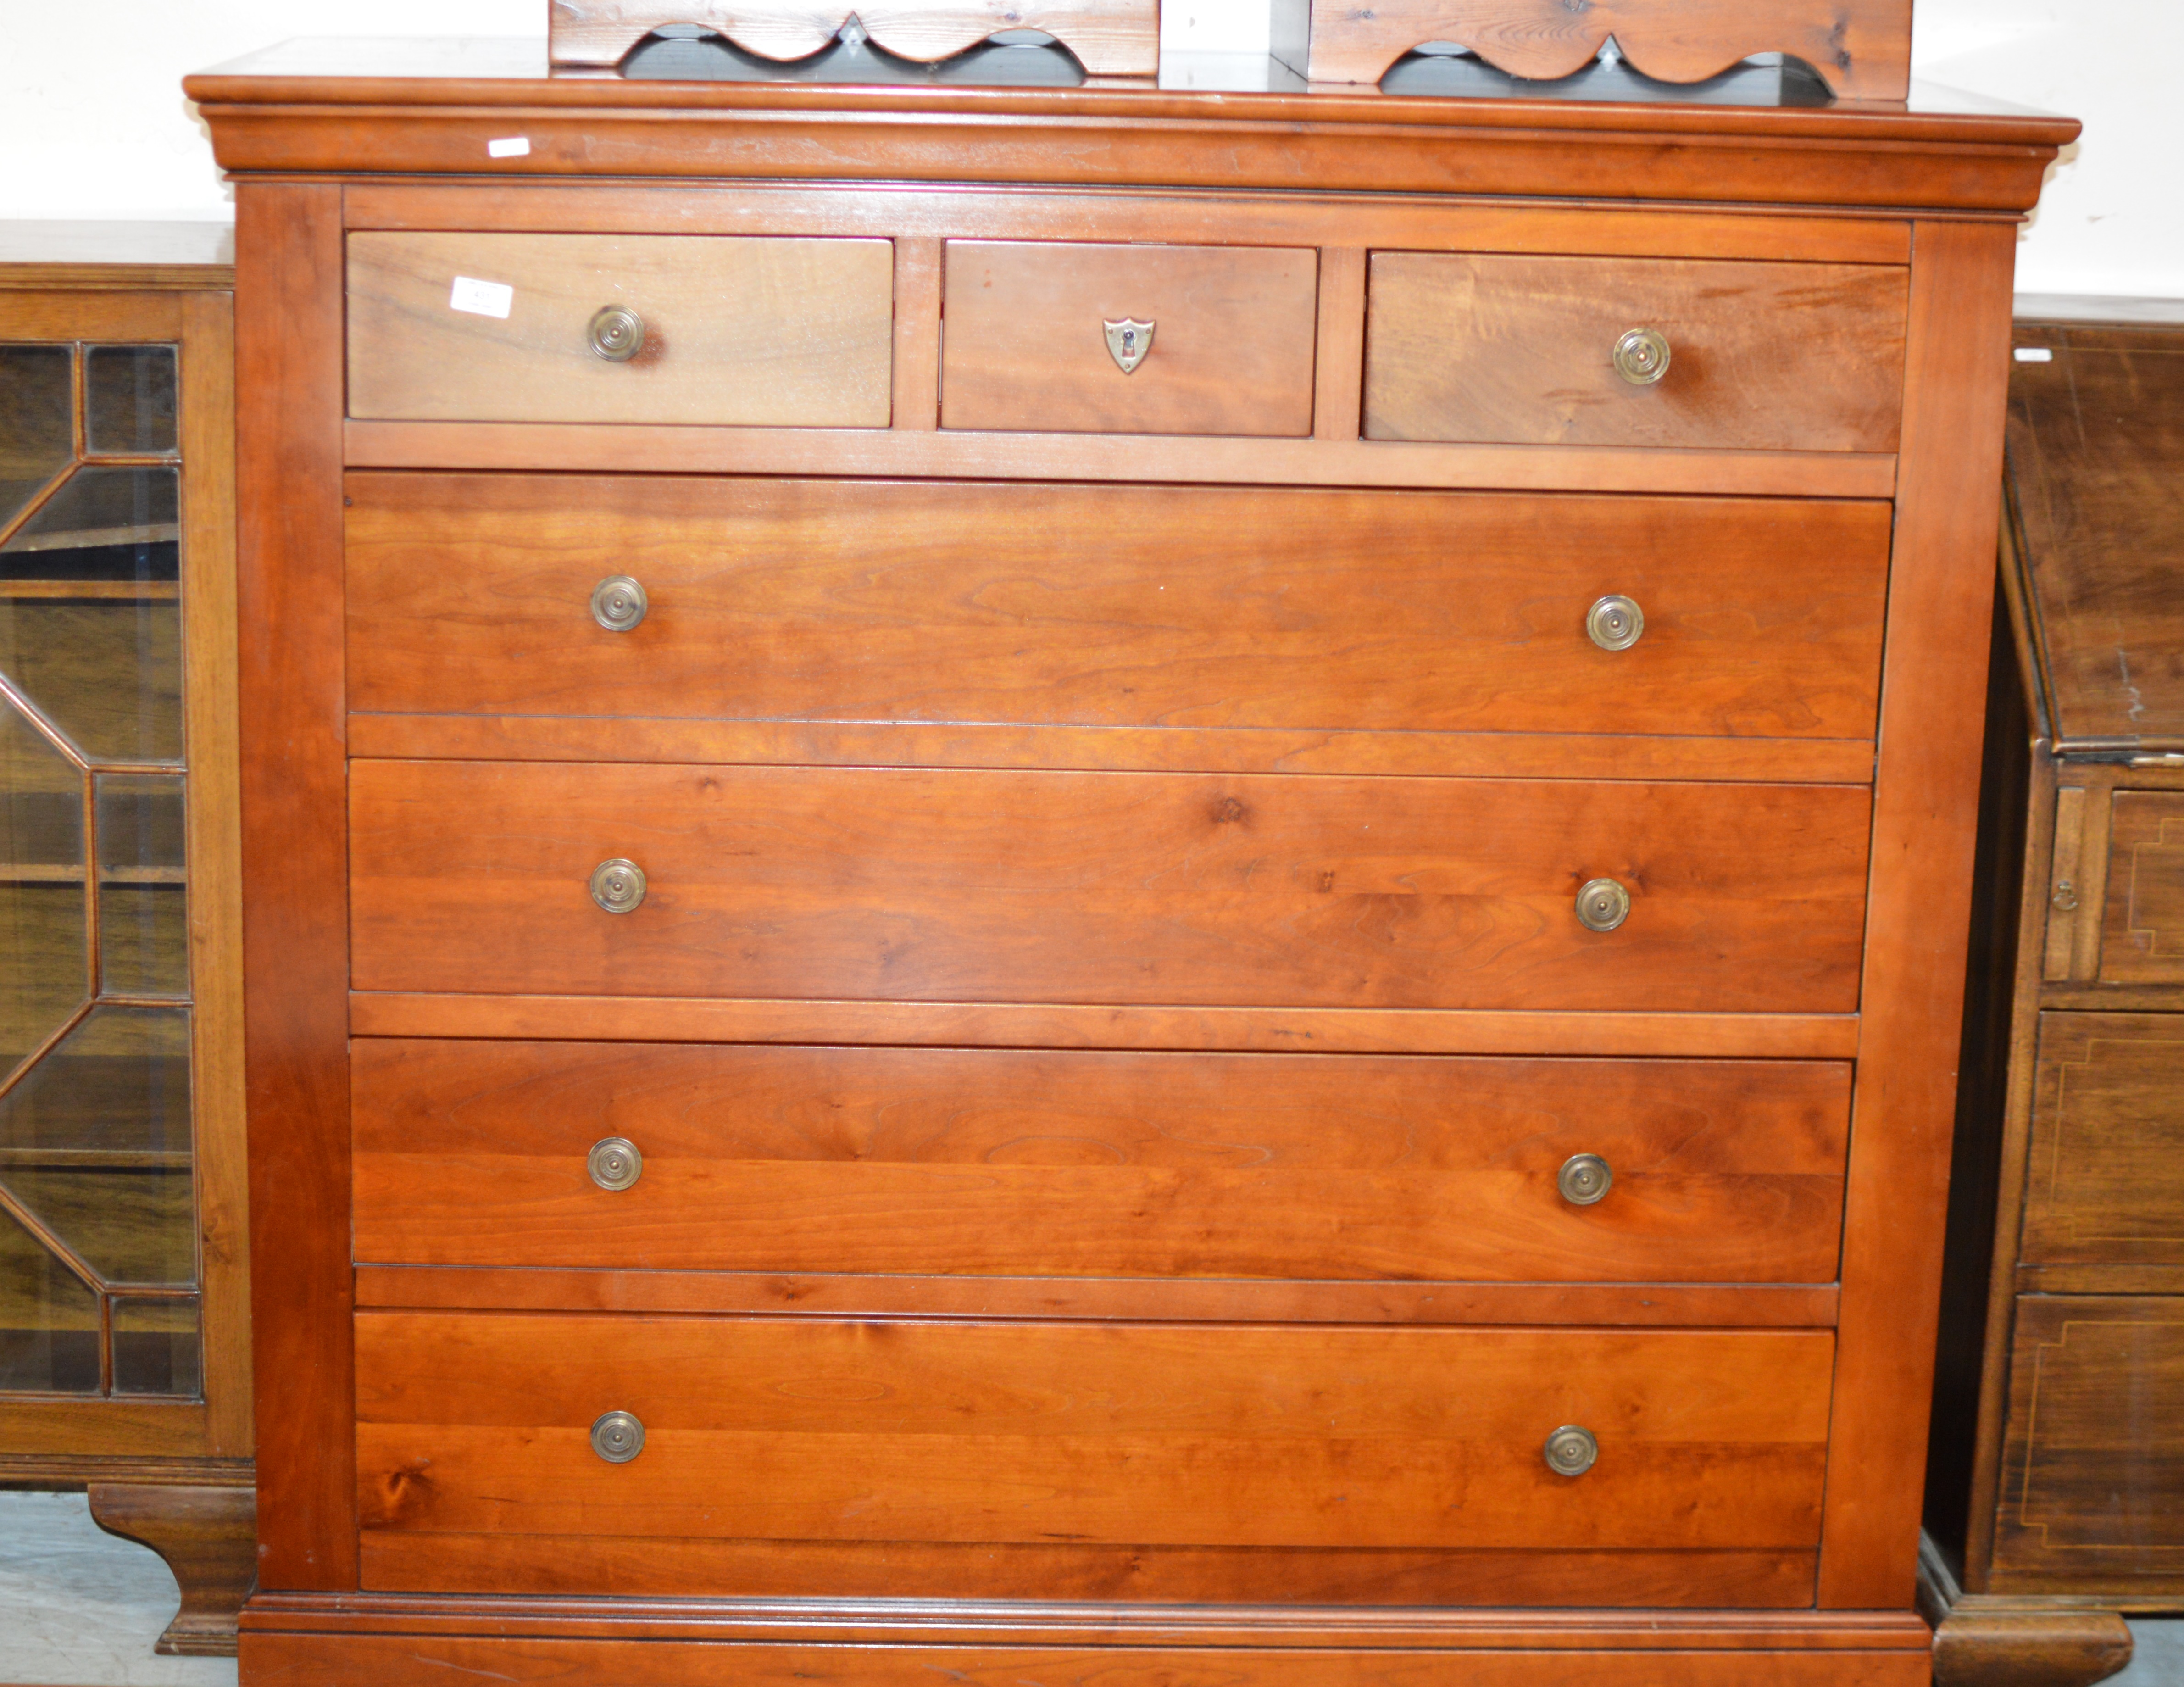 MAHOGANY 3 OVER 4 CHEST OF DRAWERS